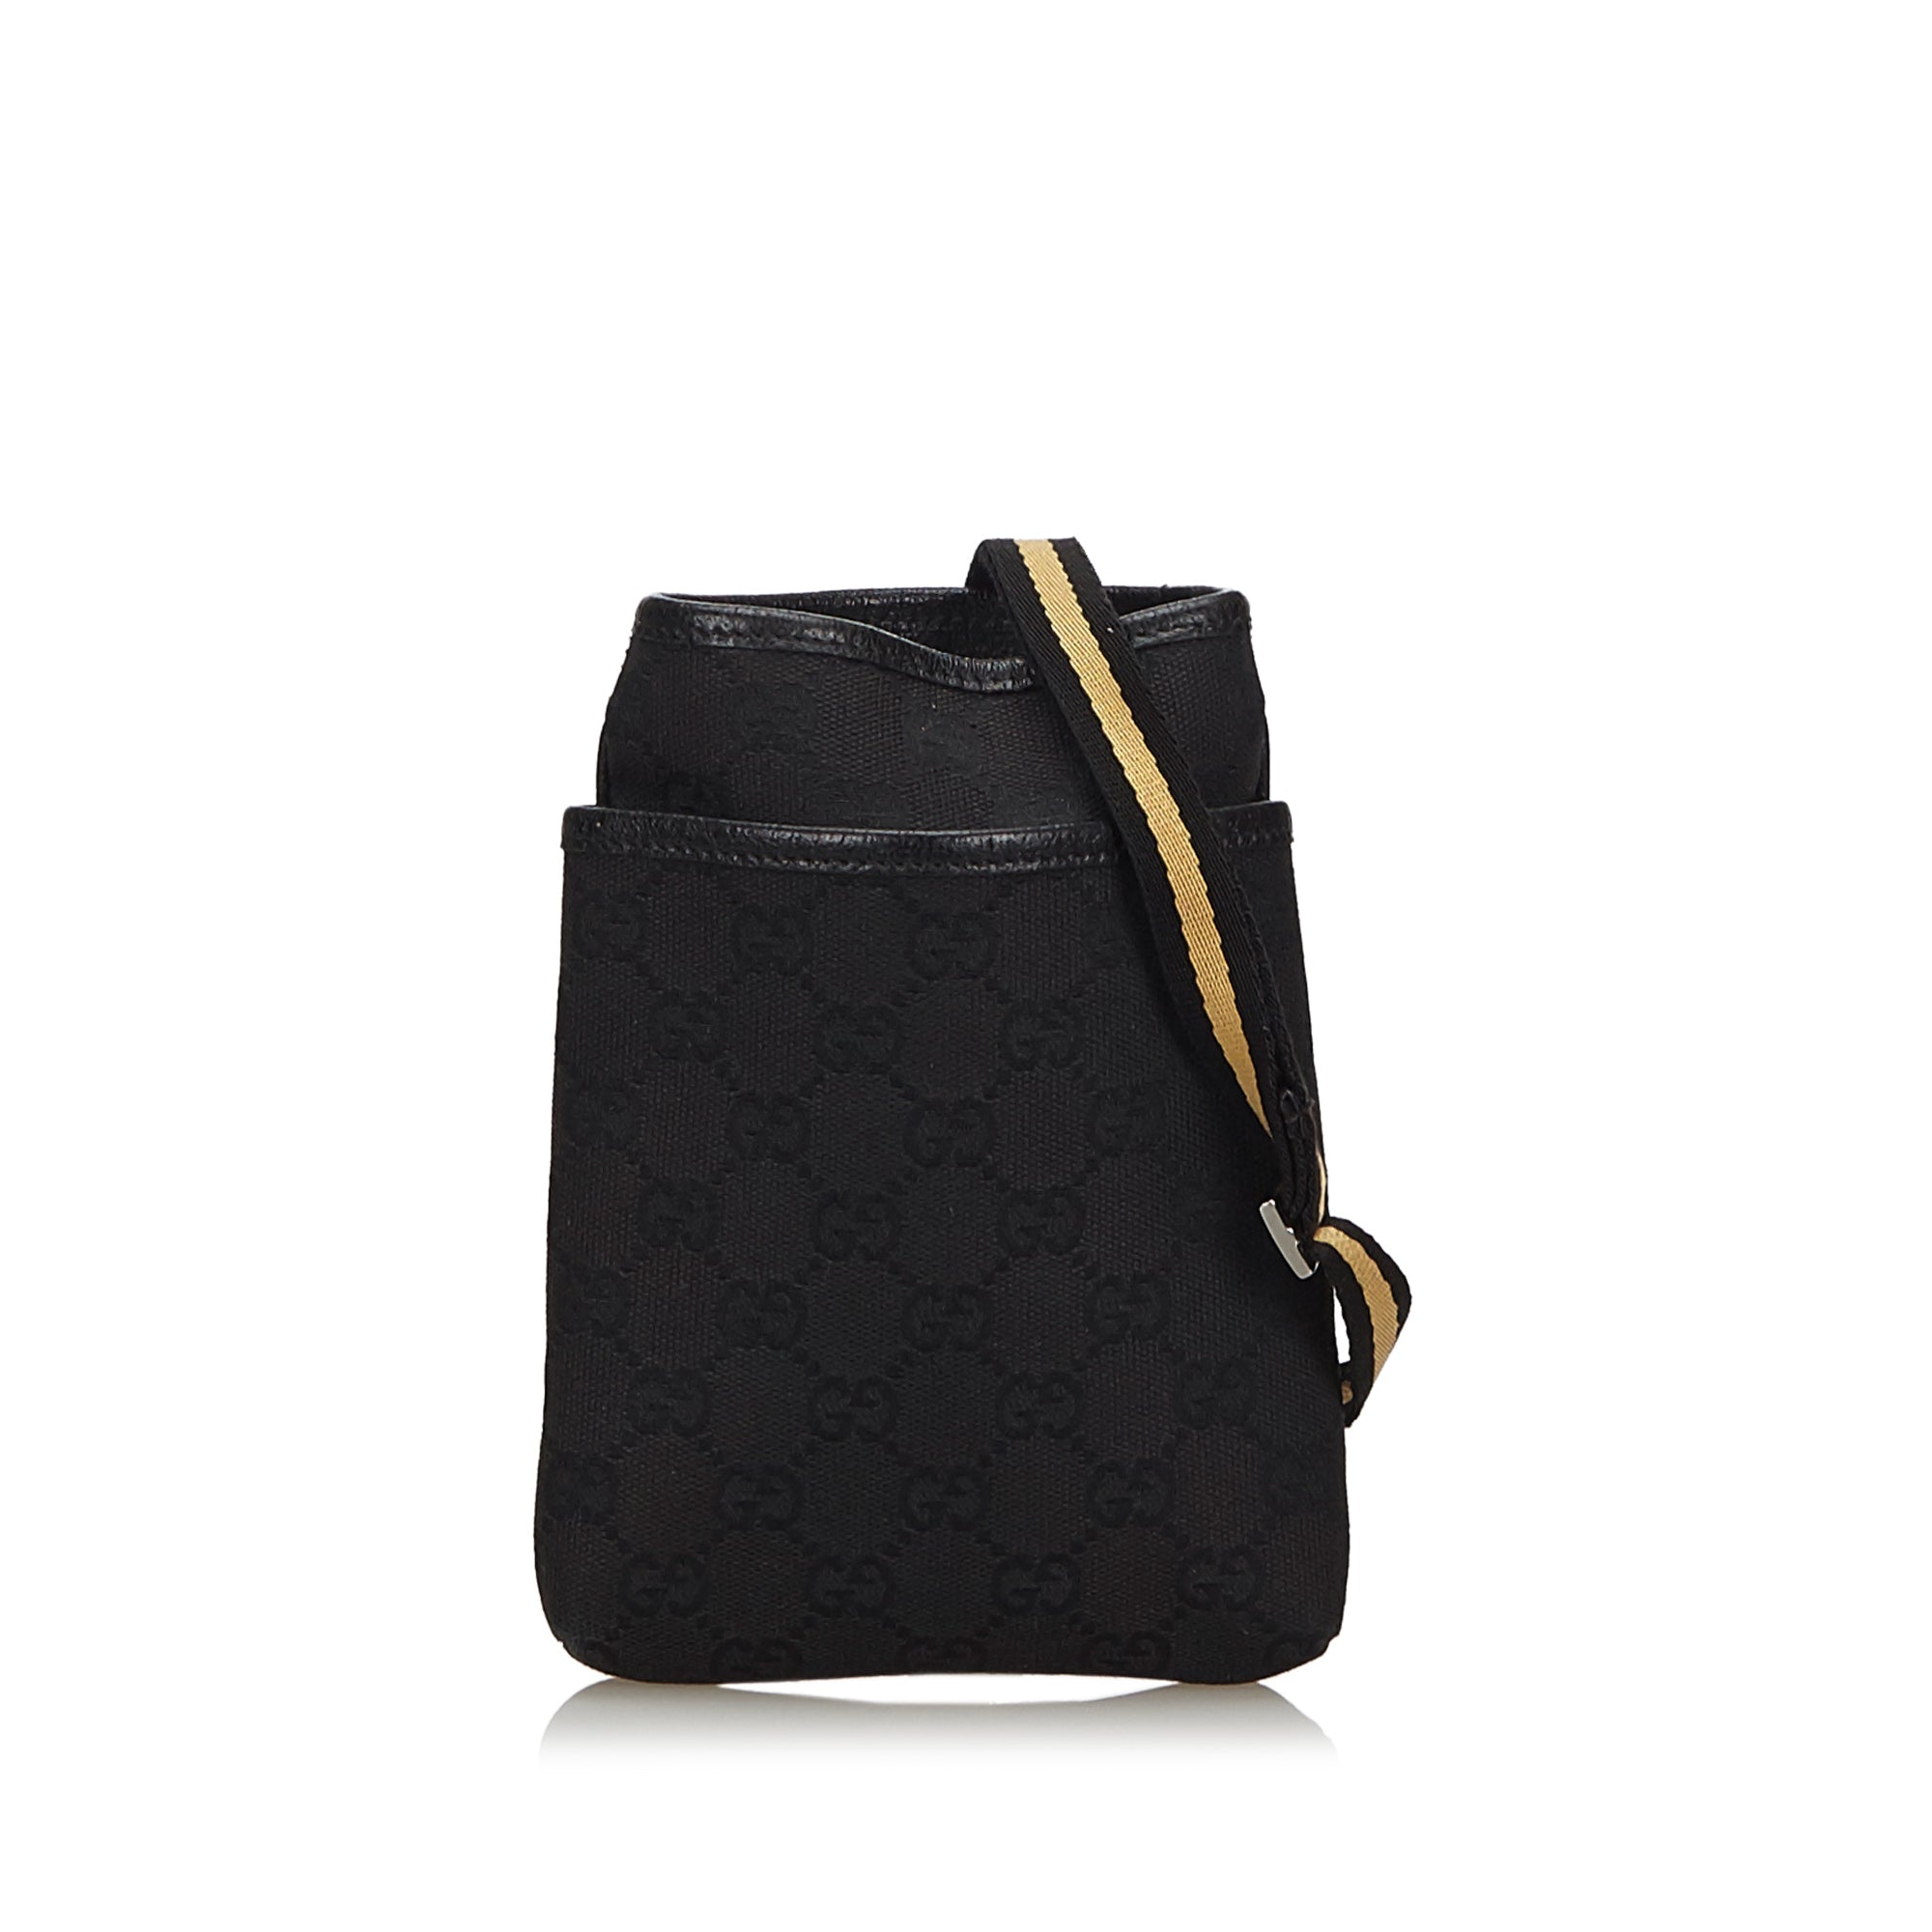 Buy & Consign Authentic Gucci GG Canvas Crossbody Bag at The Plush Posh